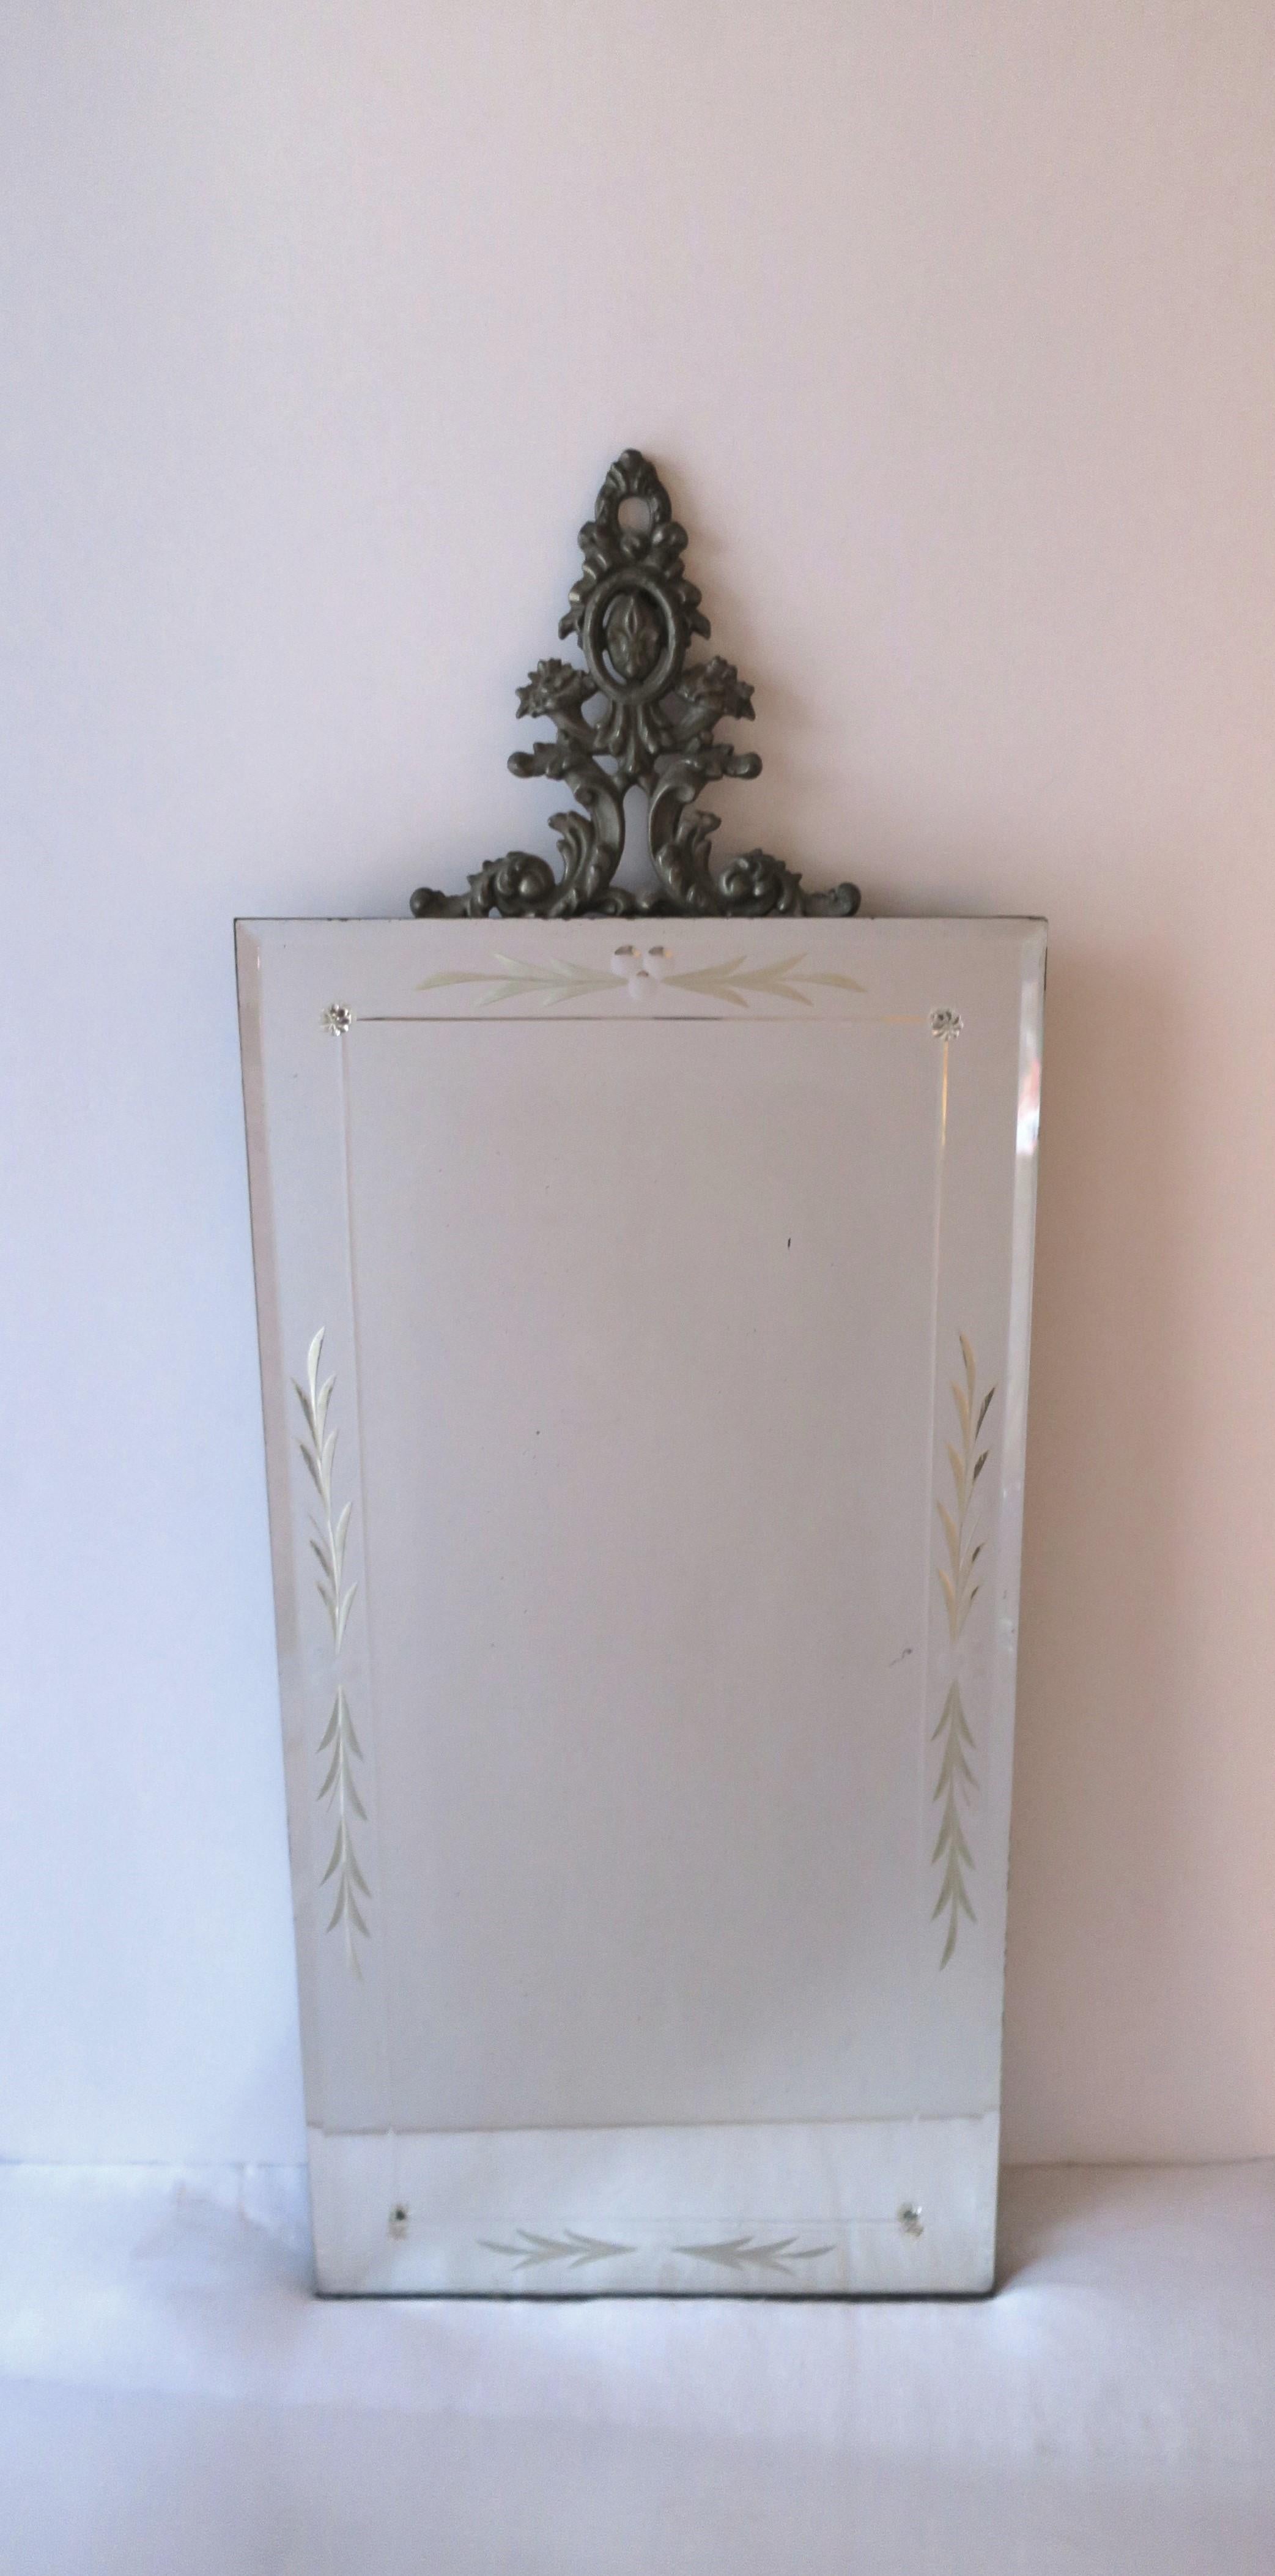 An etched wall mirror with metal ornamentation, in the Victorian style, circa early-20th century. A rectangular wall mirror with etched design, metal ornamentation at top (with flower, leaf, and fleur-de-lis design), and small glass rosettes at